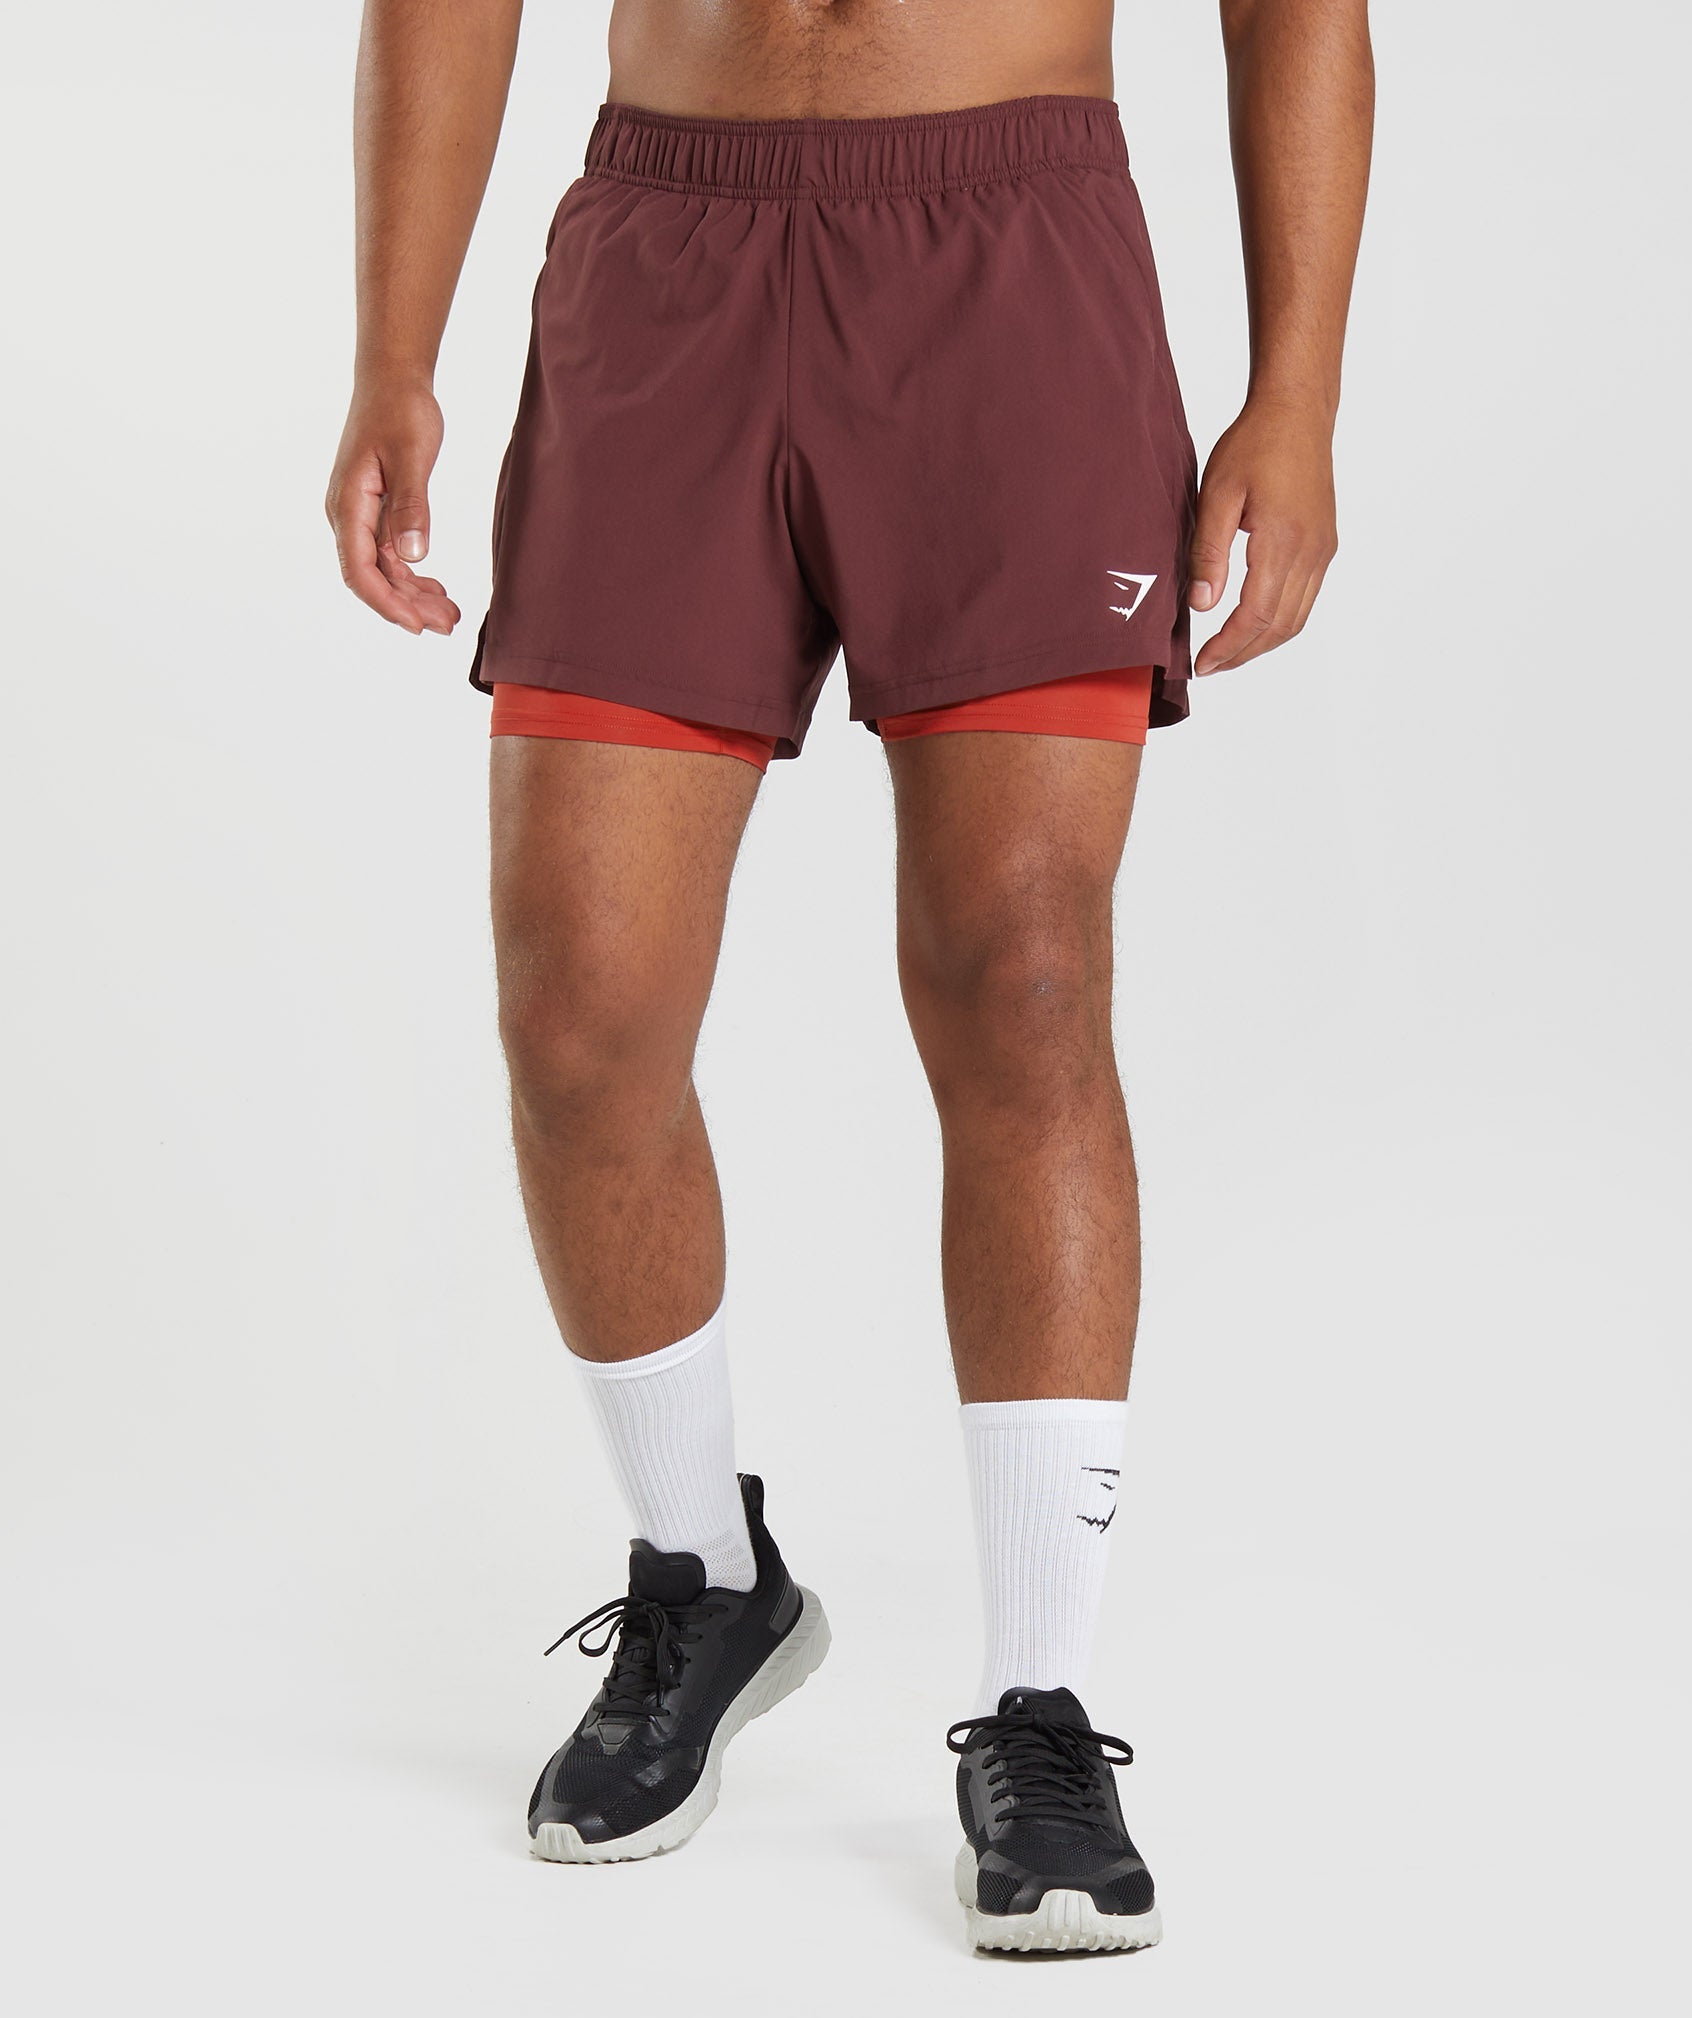 Sport 5" 2 In 1 Shorts in Baked Maroon/Salsa Red - view 1